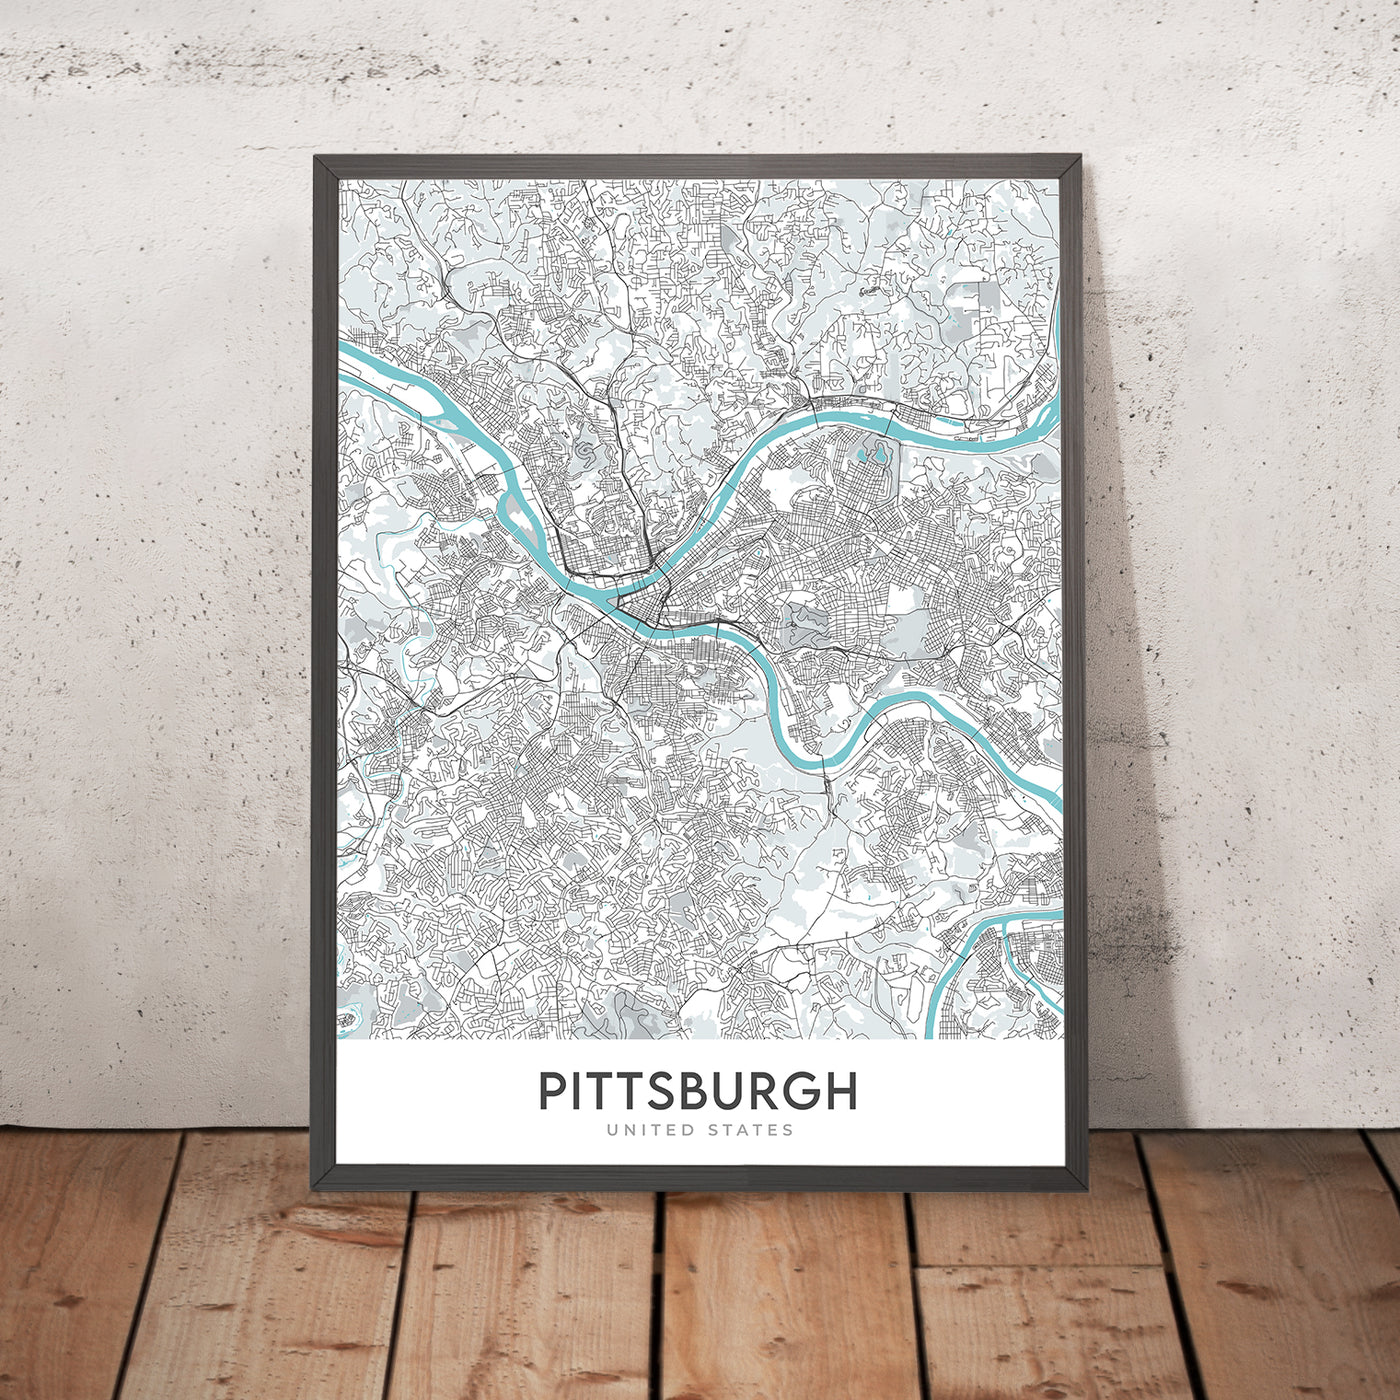 Modern City Map of Pittsburgh, PA: Downtown, Oakland, PNC Park, Heinz Field, Carnegie Museum